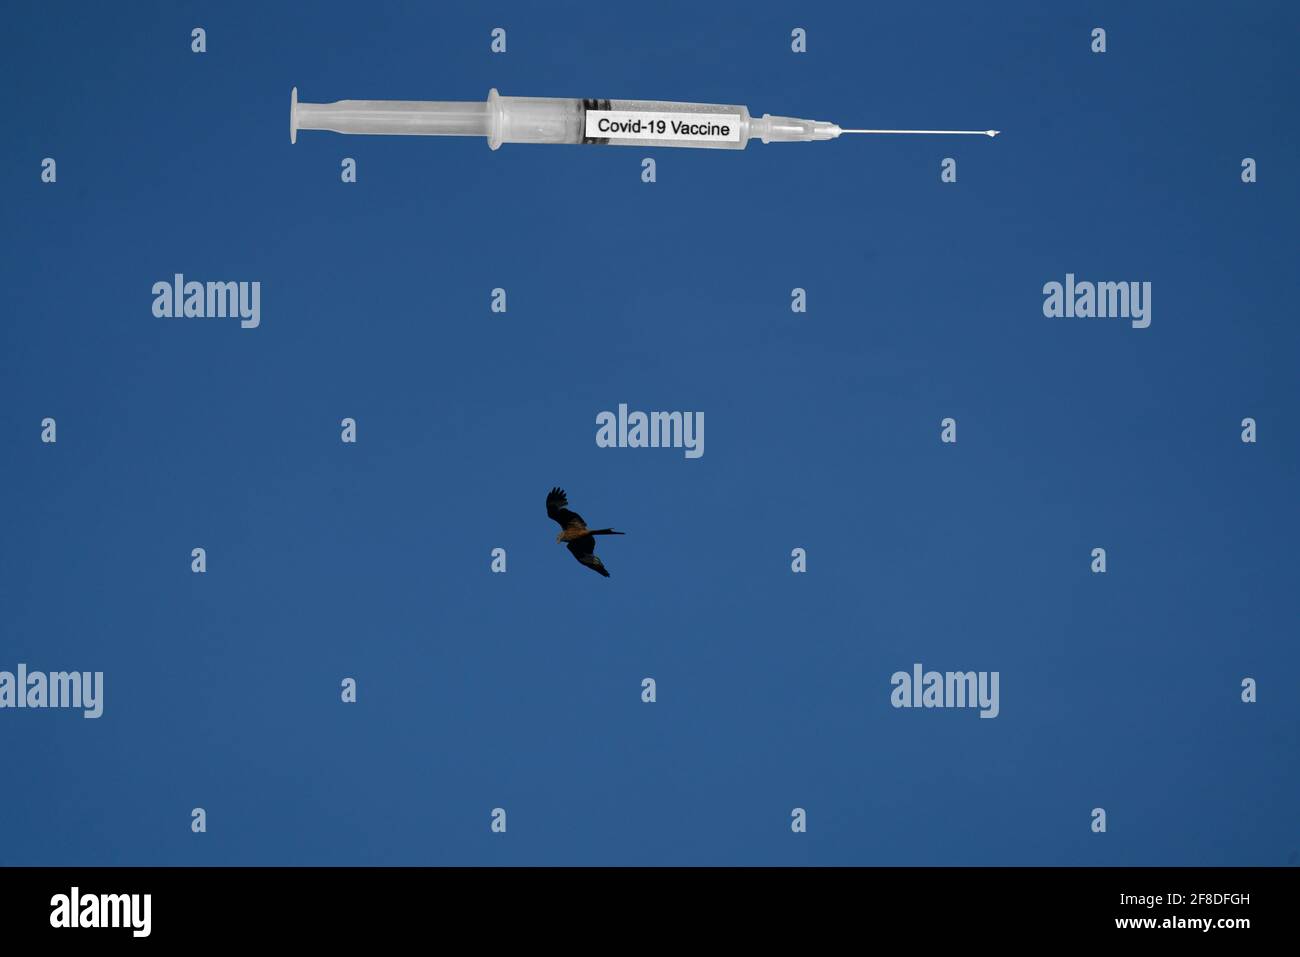 Sky with a red kite and a vaccination syringe Stock Photo